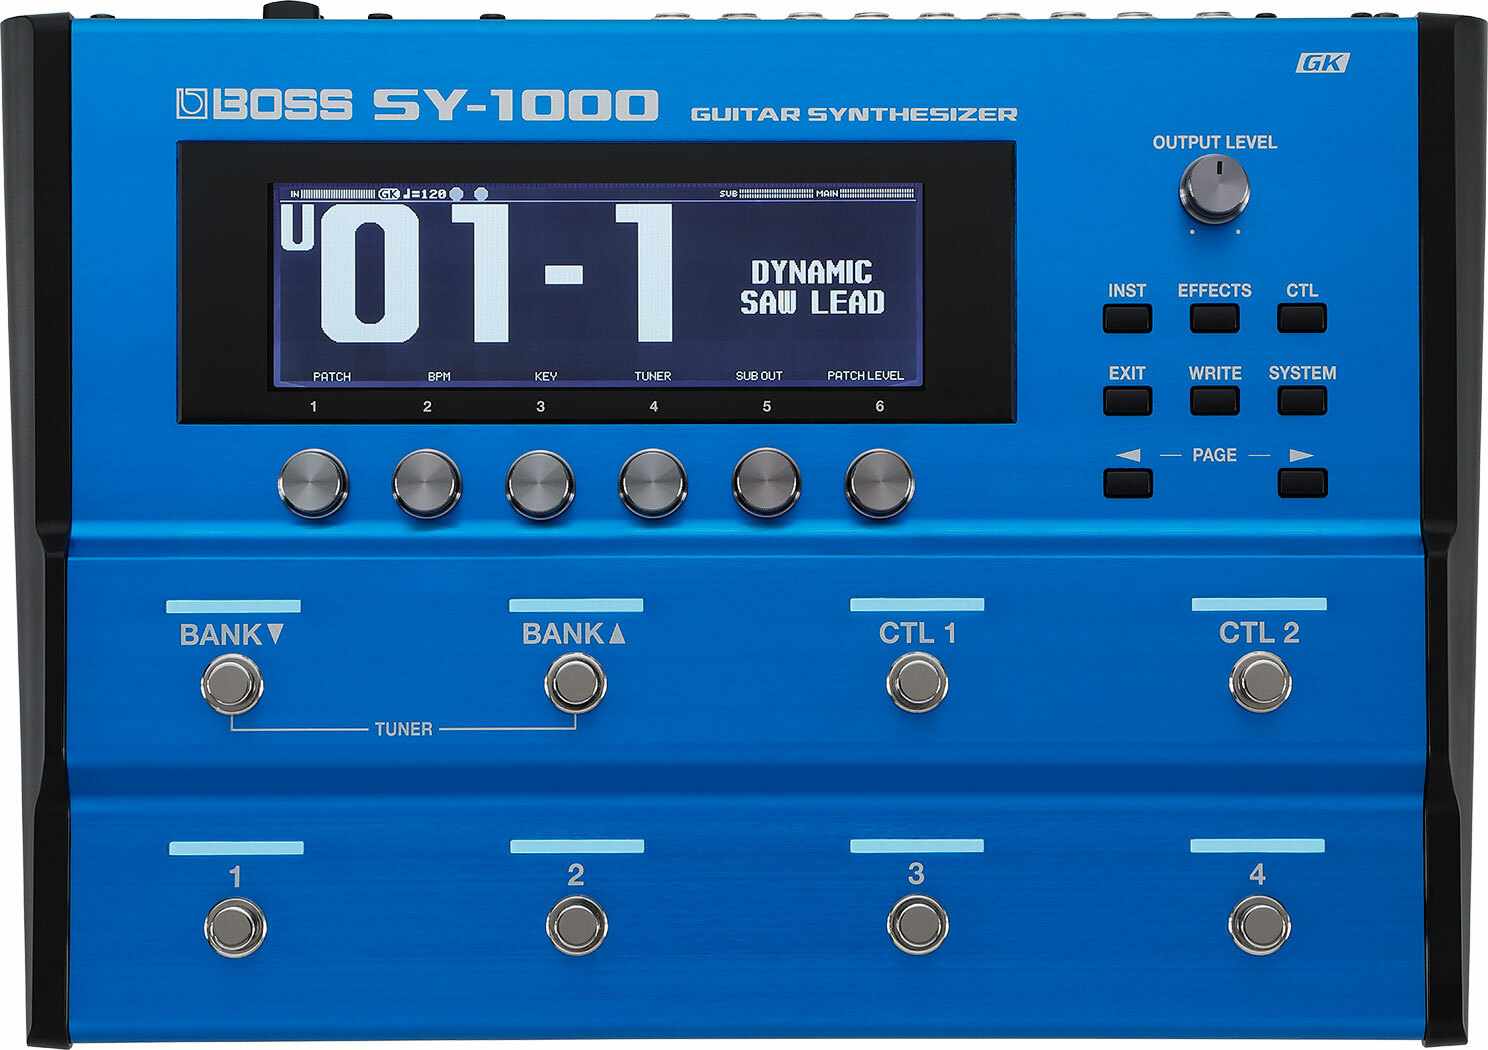 Boss Sy-1000 Guitar Synthesizer - Guitar Synthesizer - Main picture